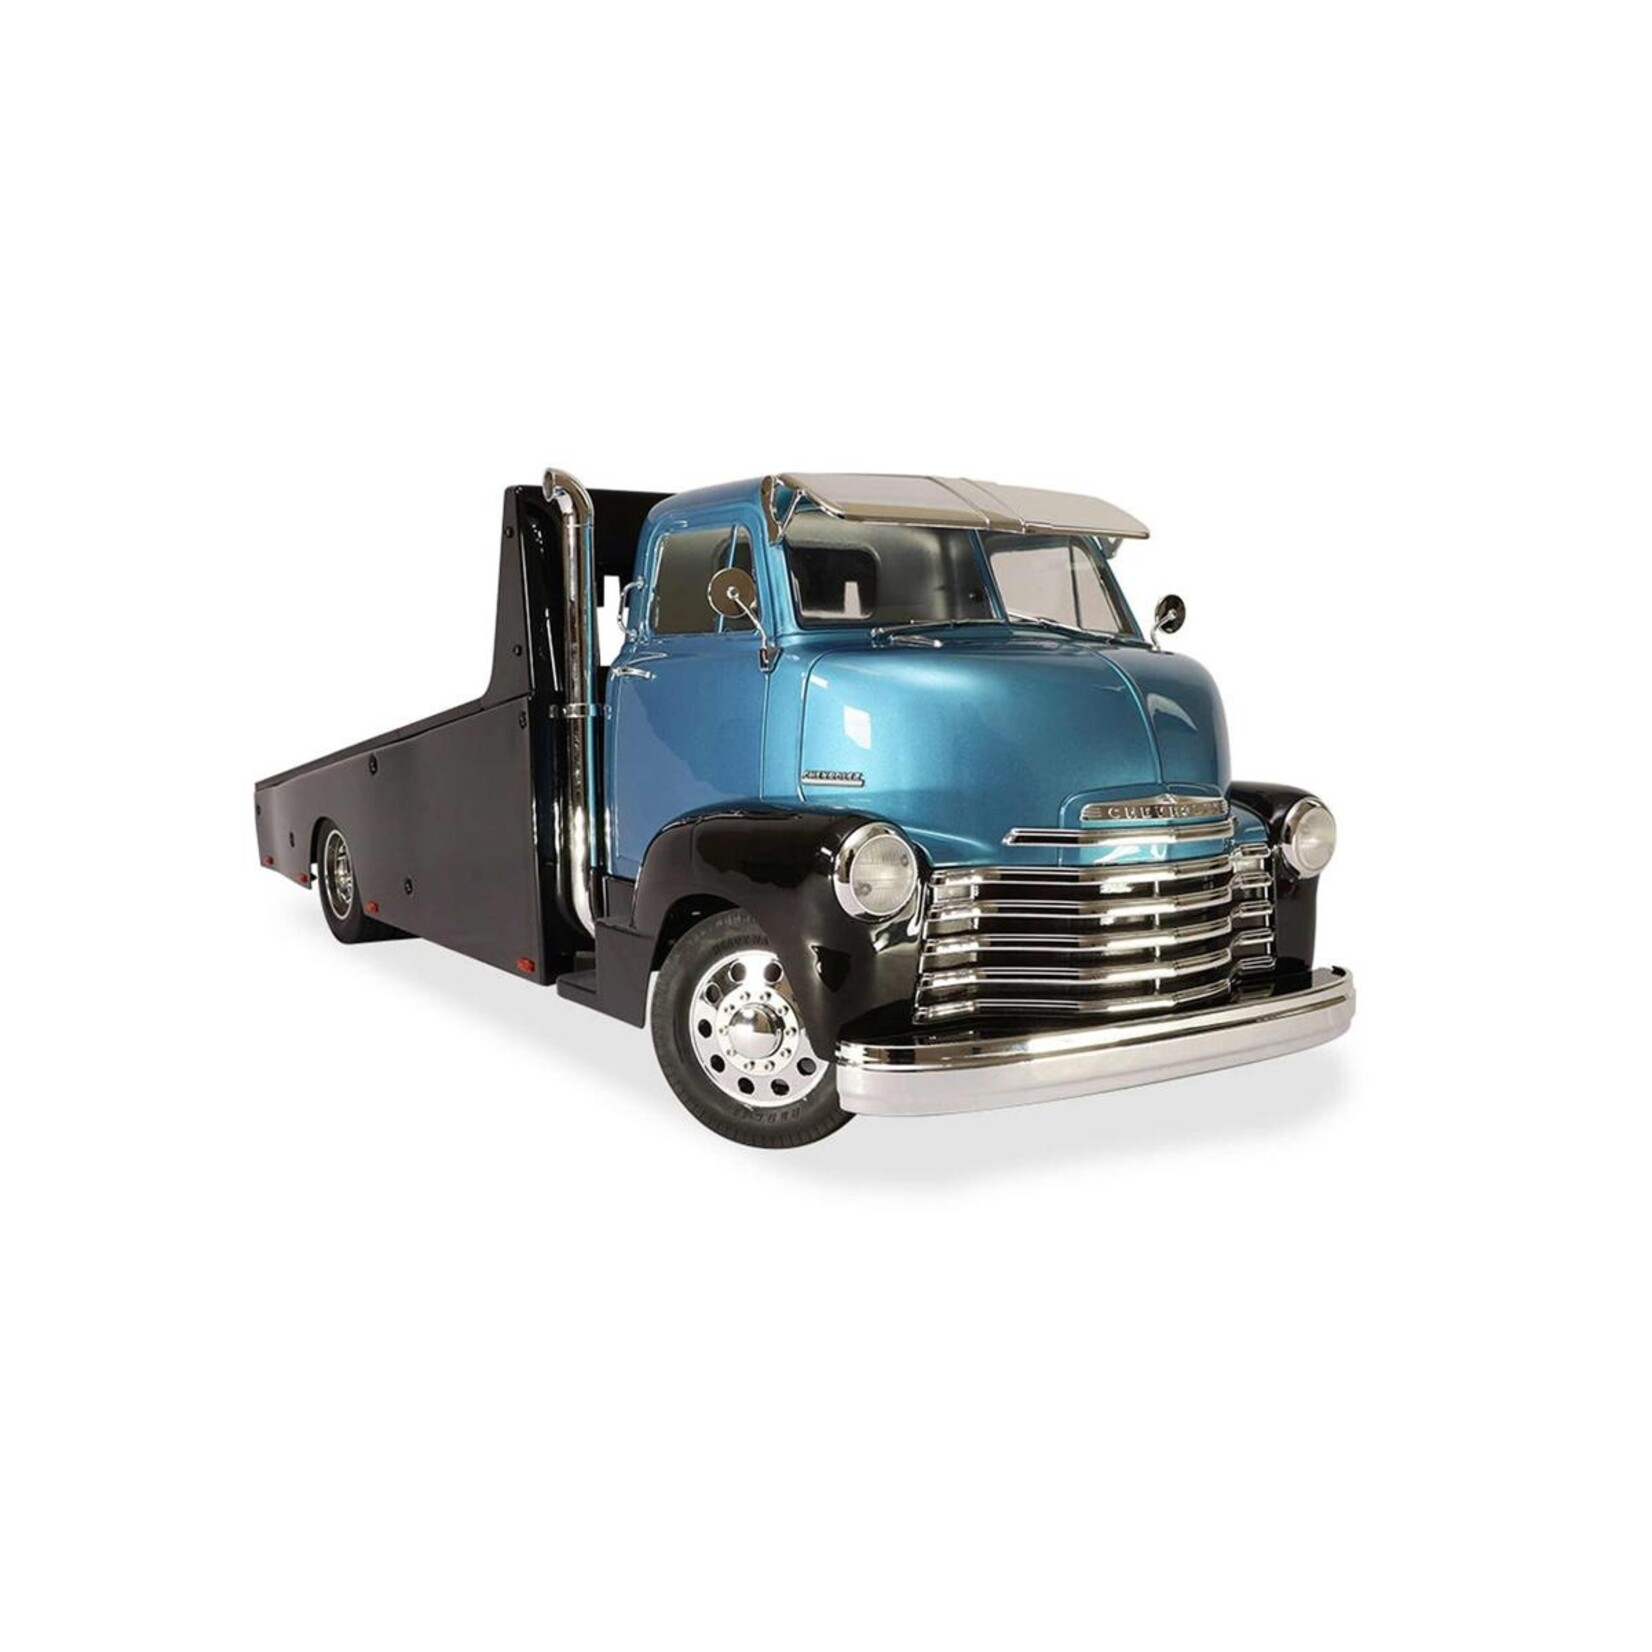 Redcat Racing Redcat 1953 Chevrolet Cab Over Engine RTR 1/10 Scale Custom Hauler (Blue) w/2.4GHz Radio #RER22769